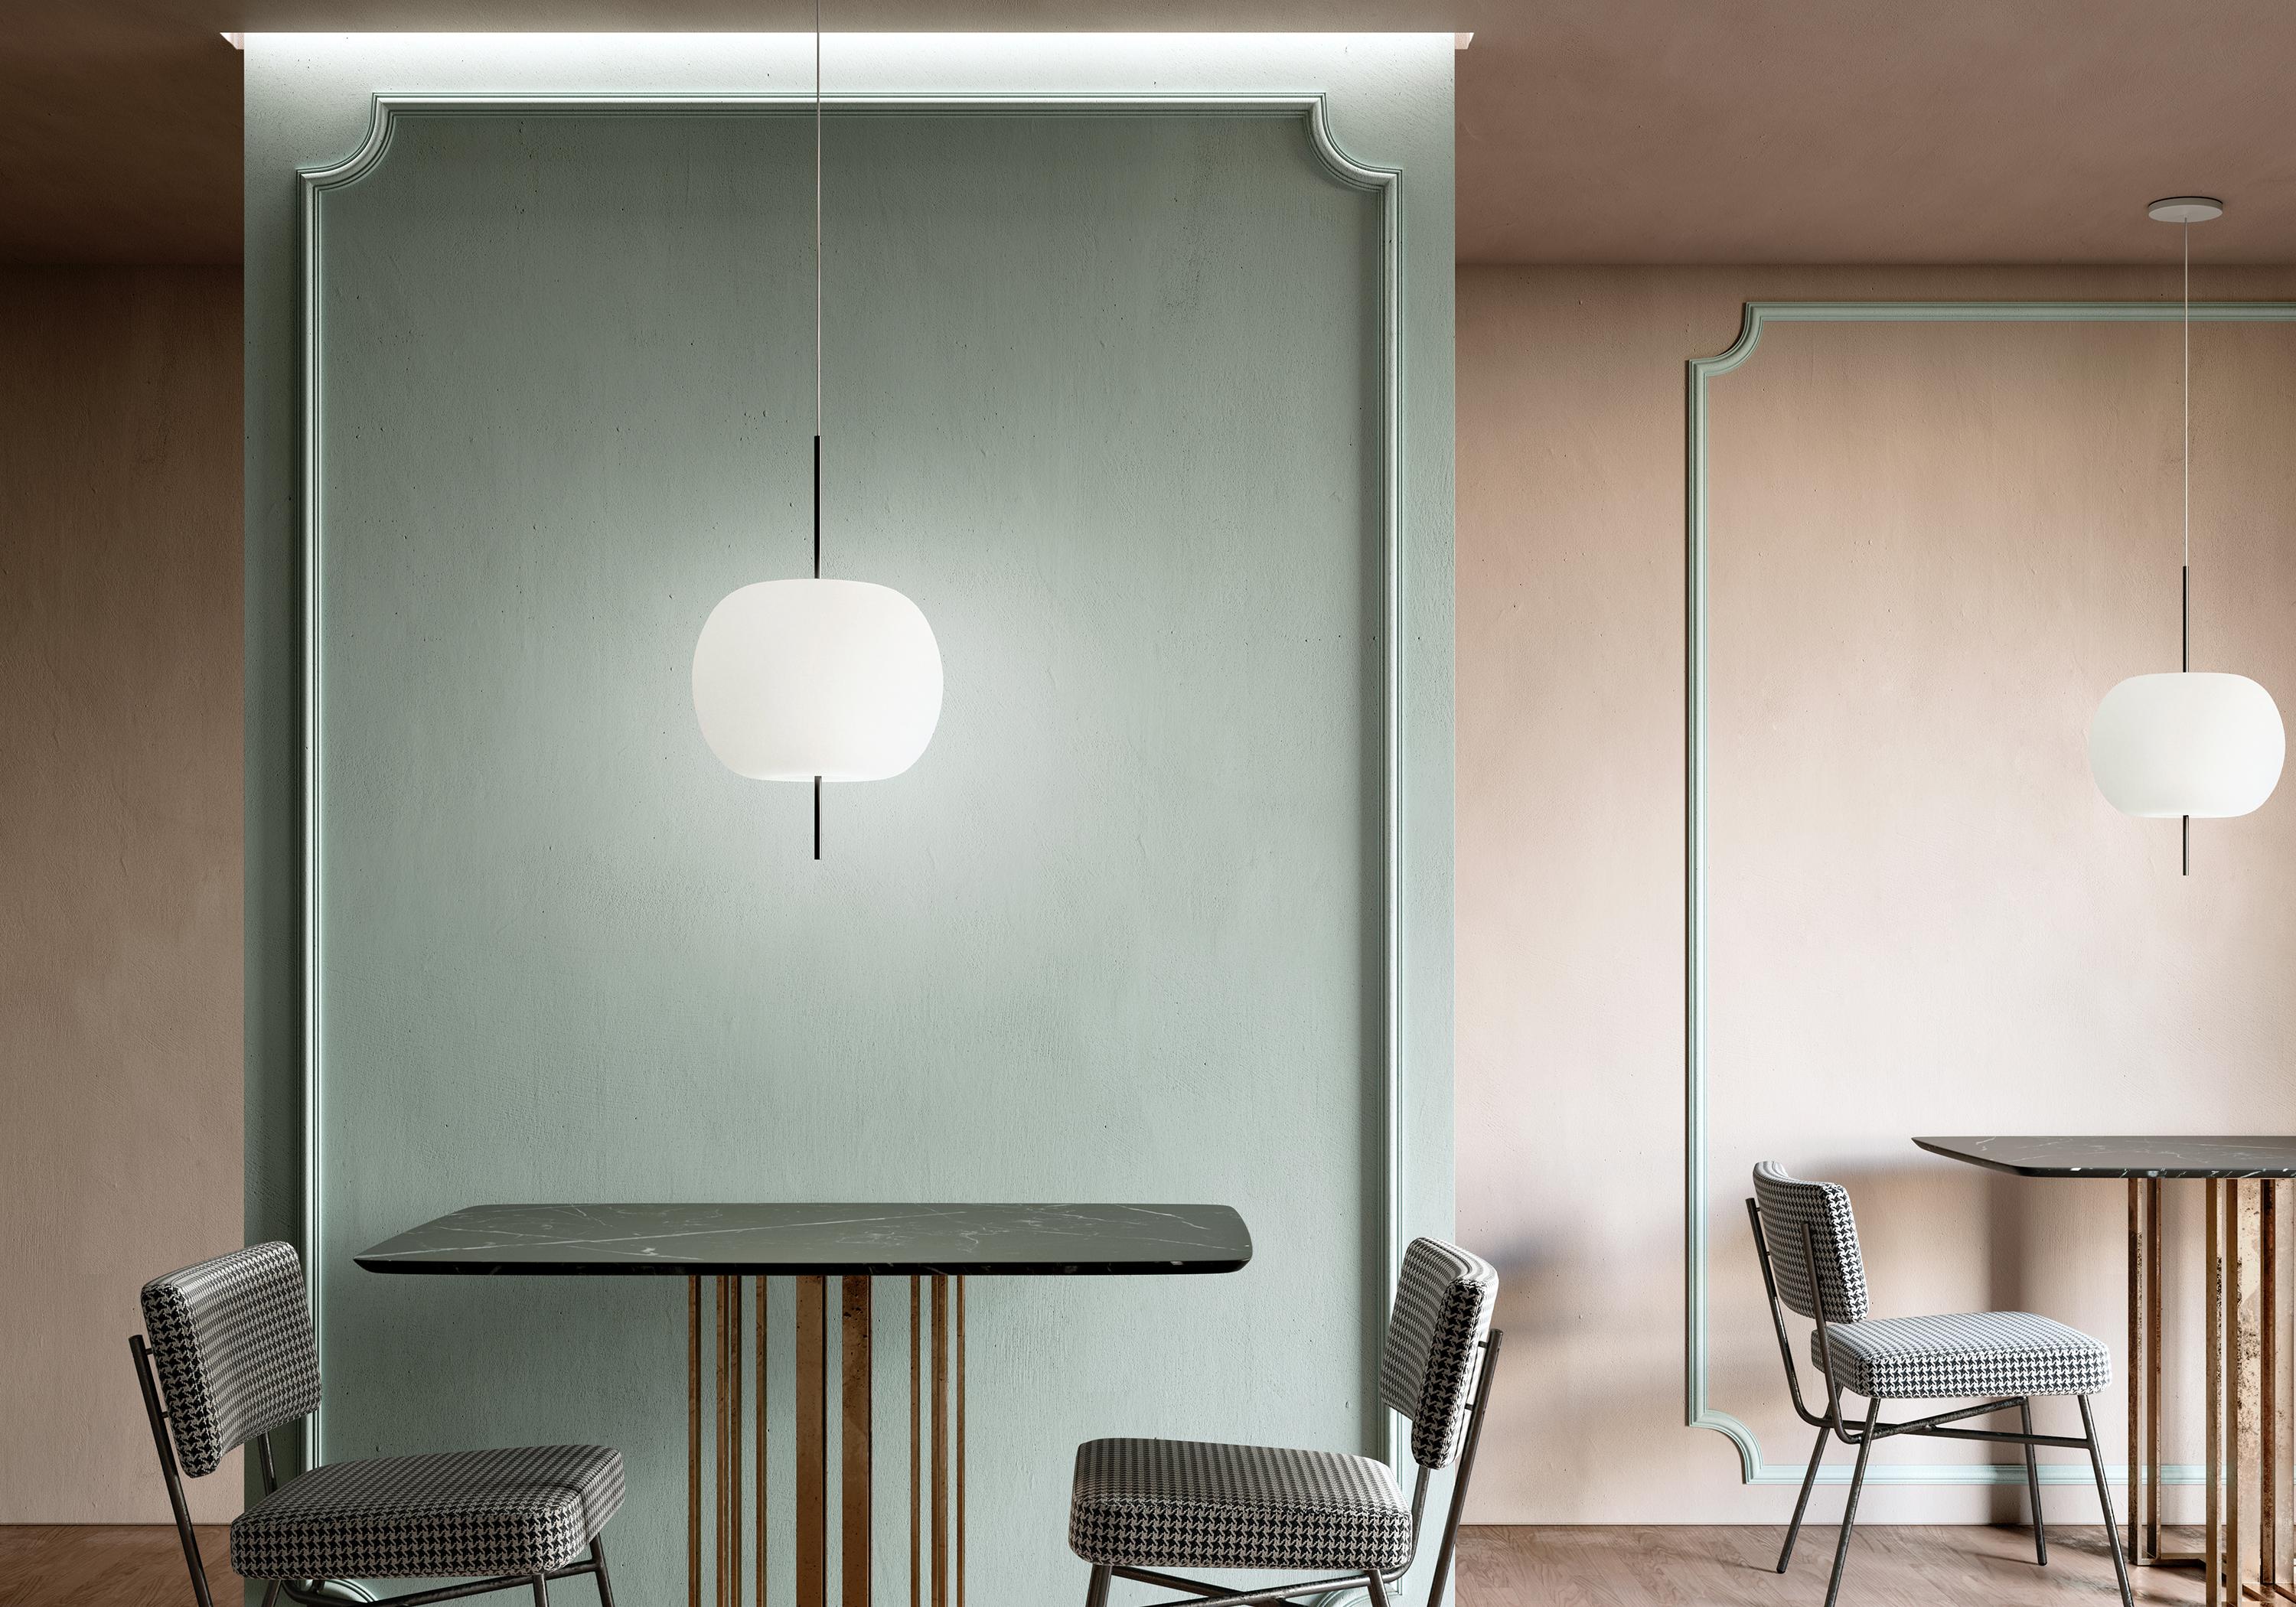 Kushi 16 Led Suspension Brass Finish

Kushi, “skewer” in Japanese. An abstract shape freely inspired by Japanese cuisine. A gently rounded glass shape pierced by a thin metal rod. Its soft, warm light floats gently in the space. In the suspended